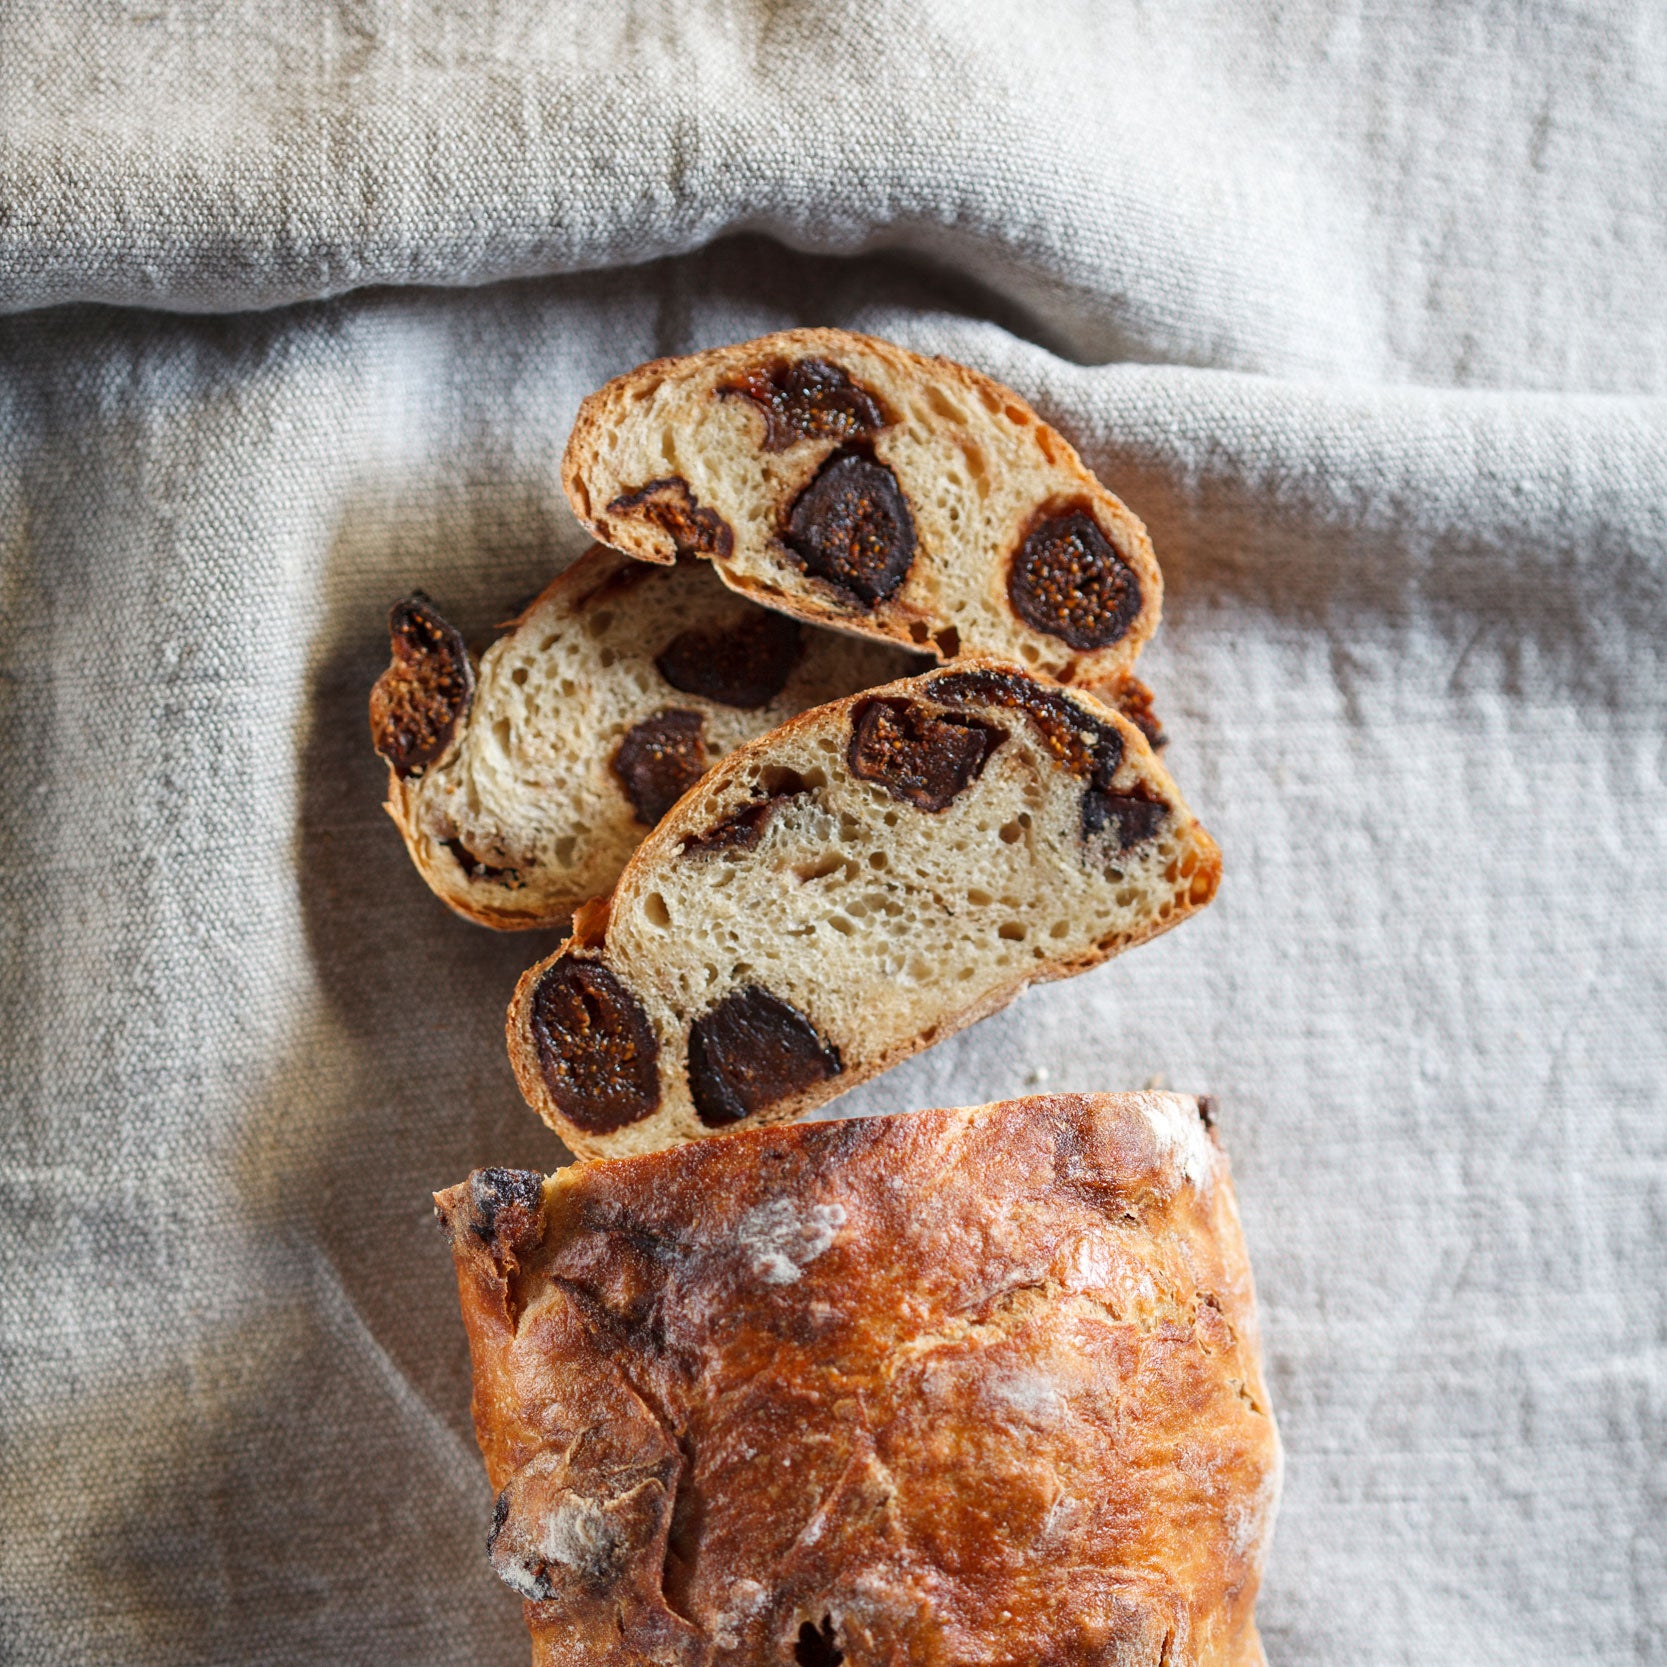 Mission Fig Bread from Noe Valley Bakery